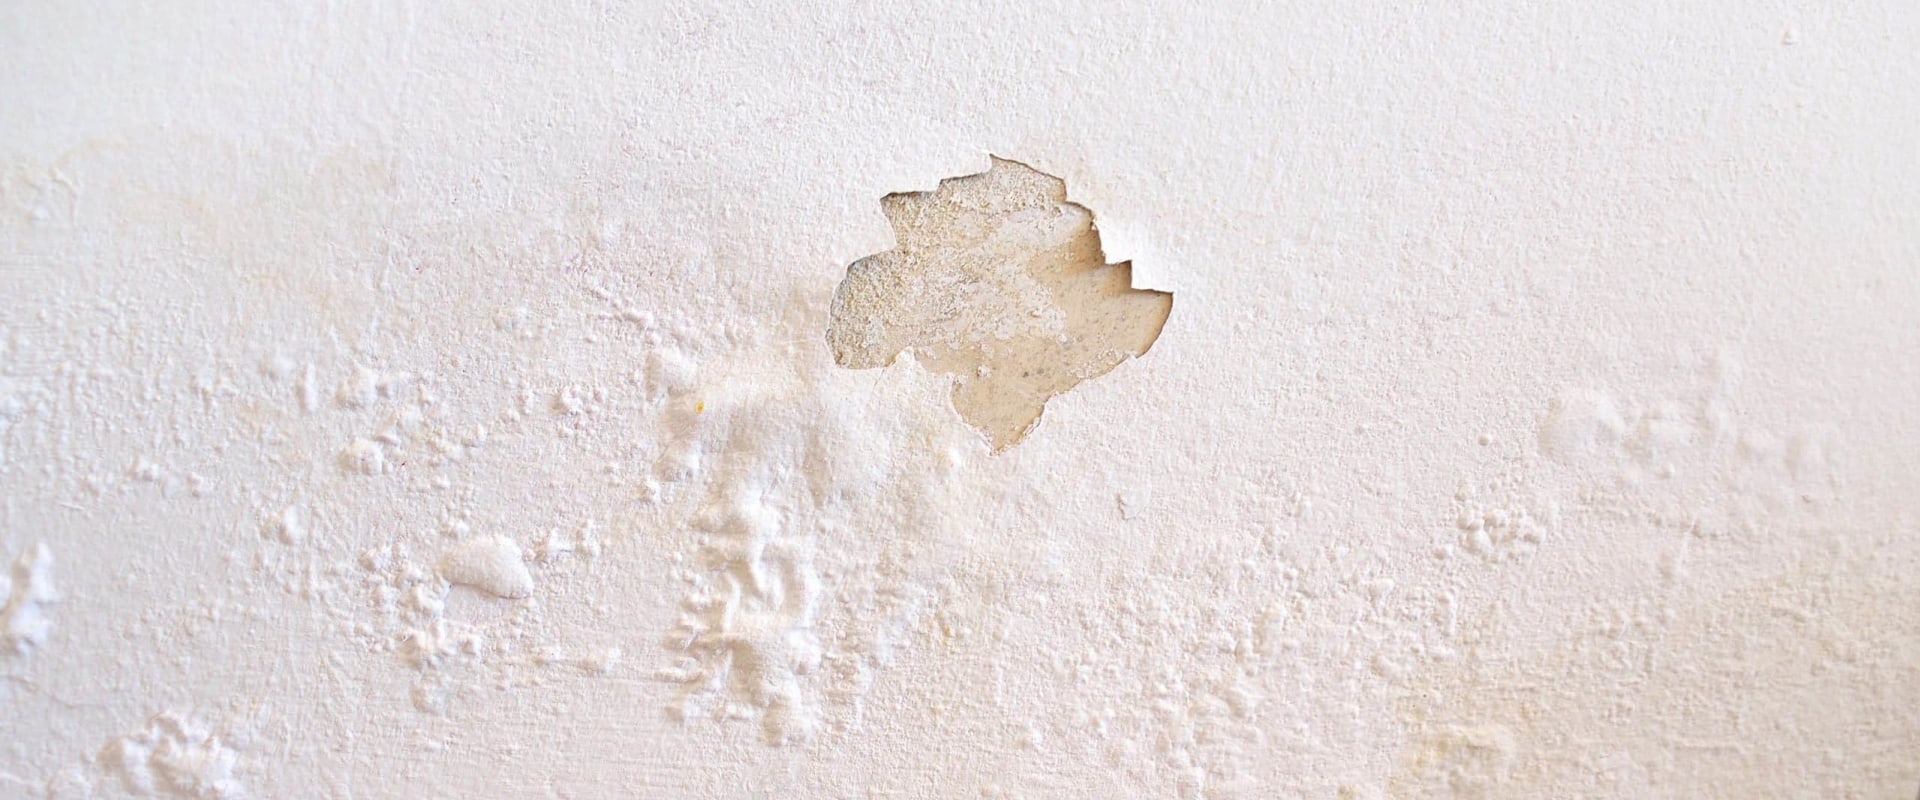 Does a water stain always mean mold?